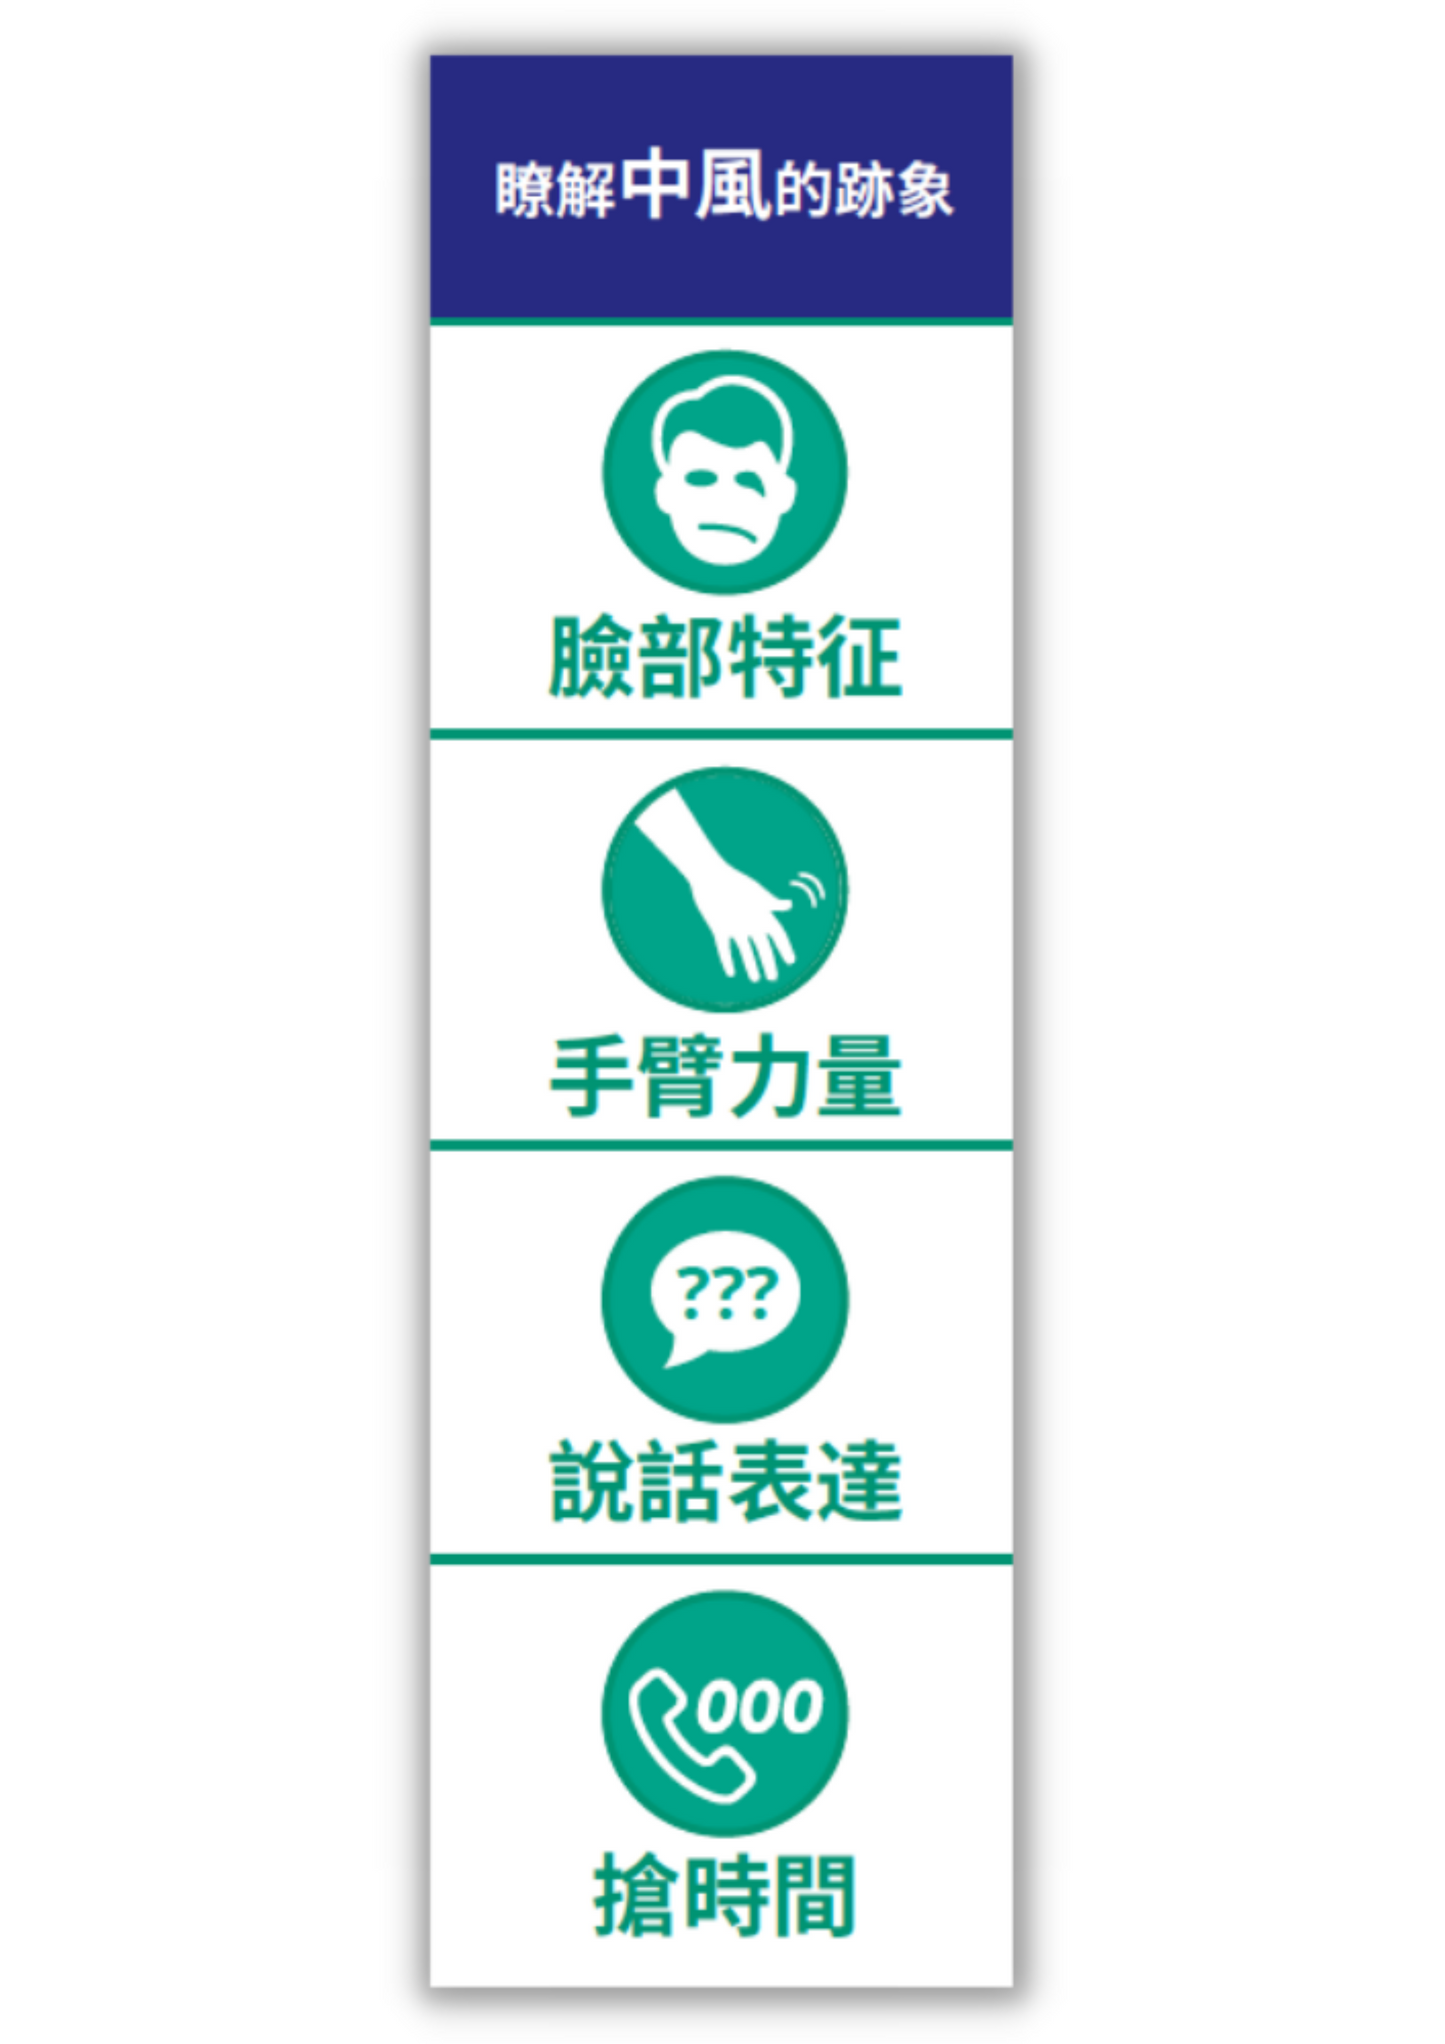 F.A.S.T. bookmark - 繁體中文 (Chinese Traditional) version